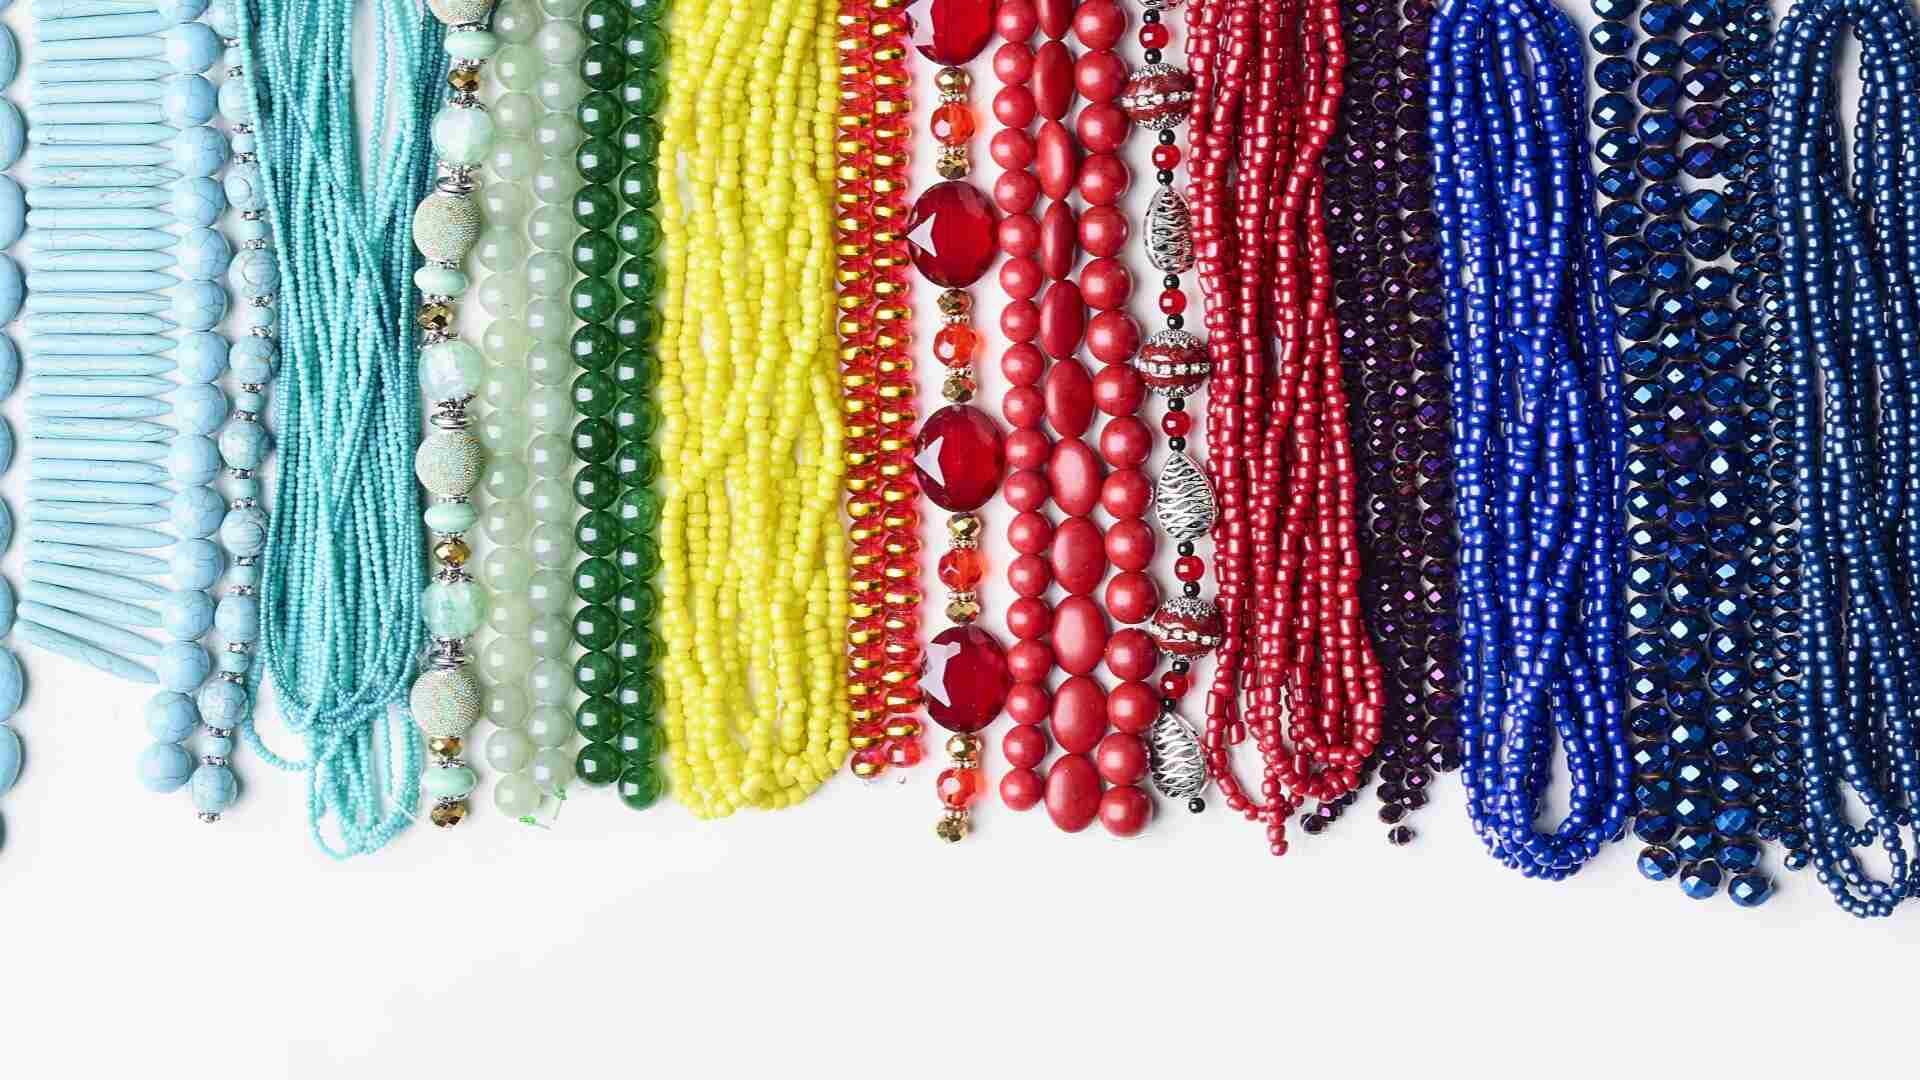 Your Complete Guide To Beads For Jewellery, Sewing & Craft Creations